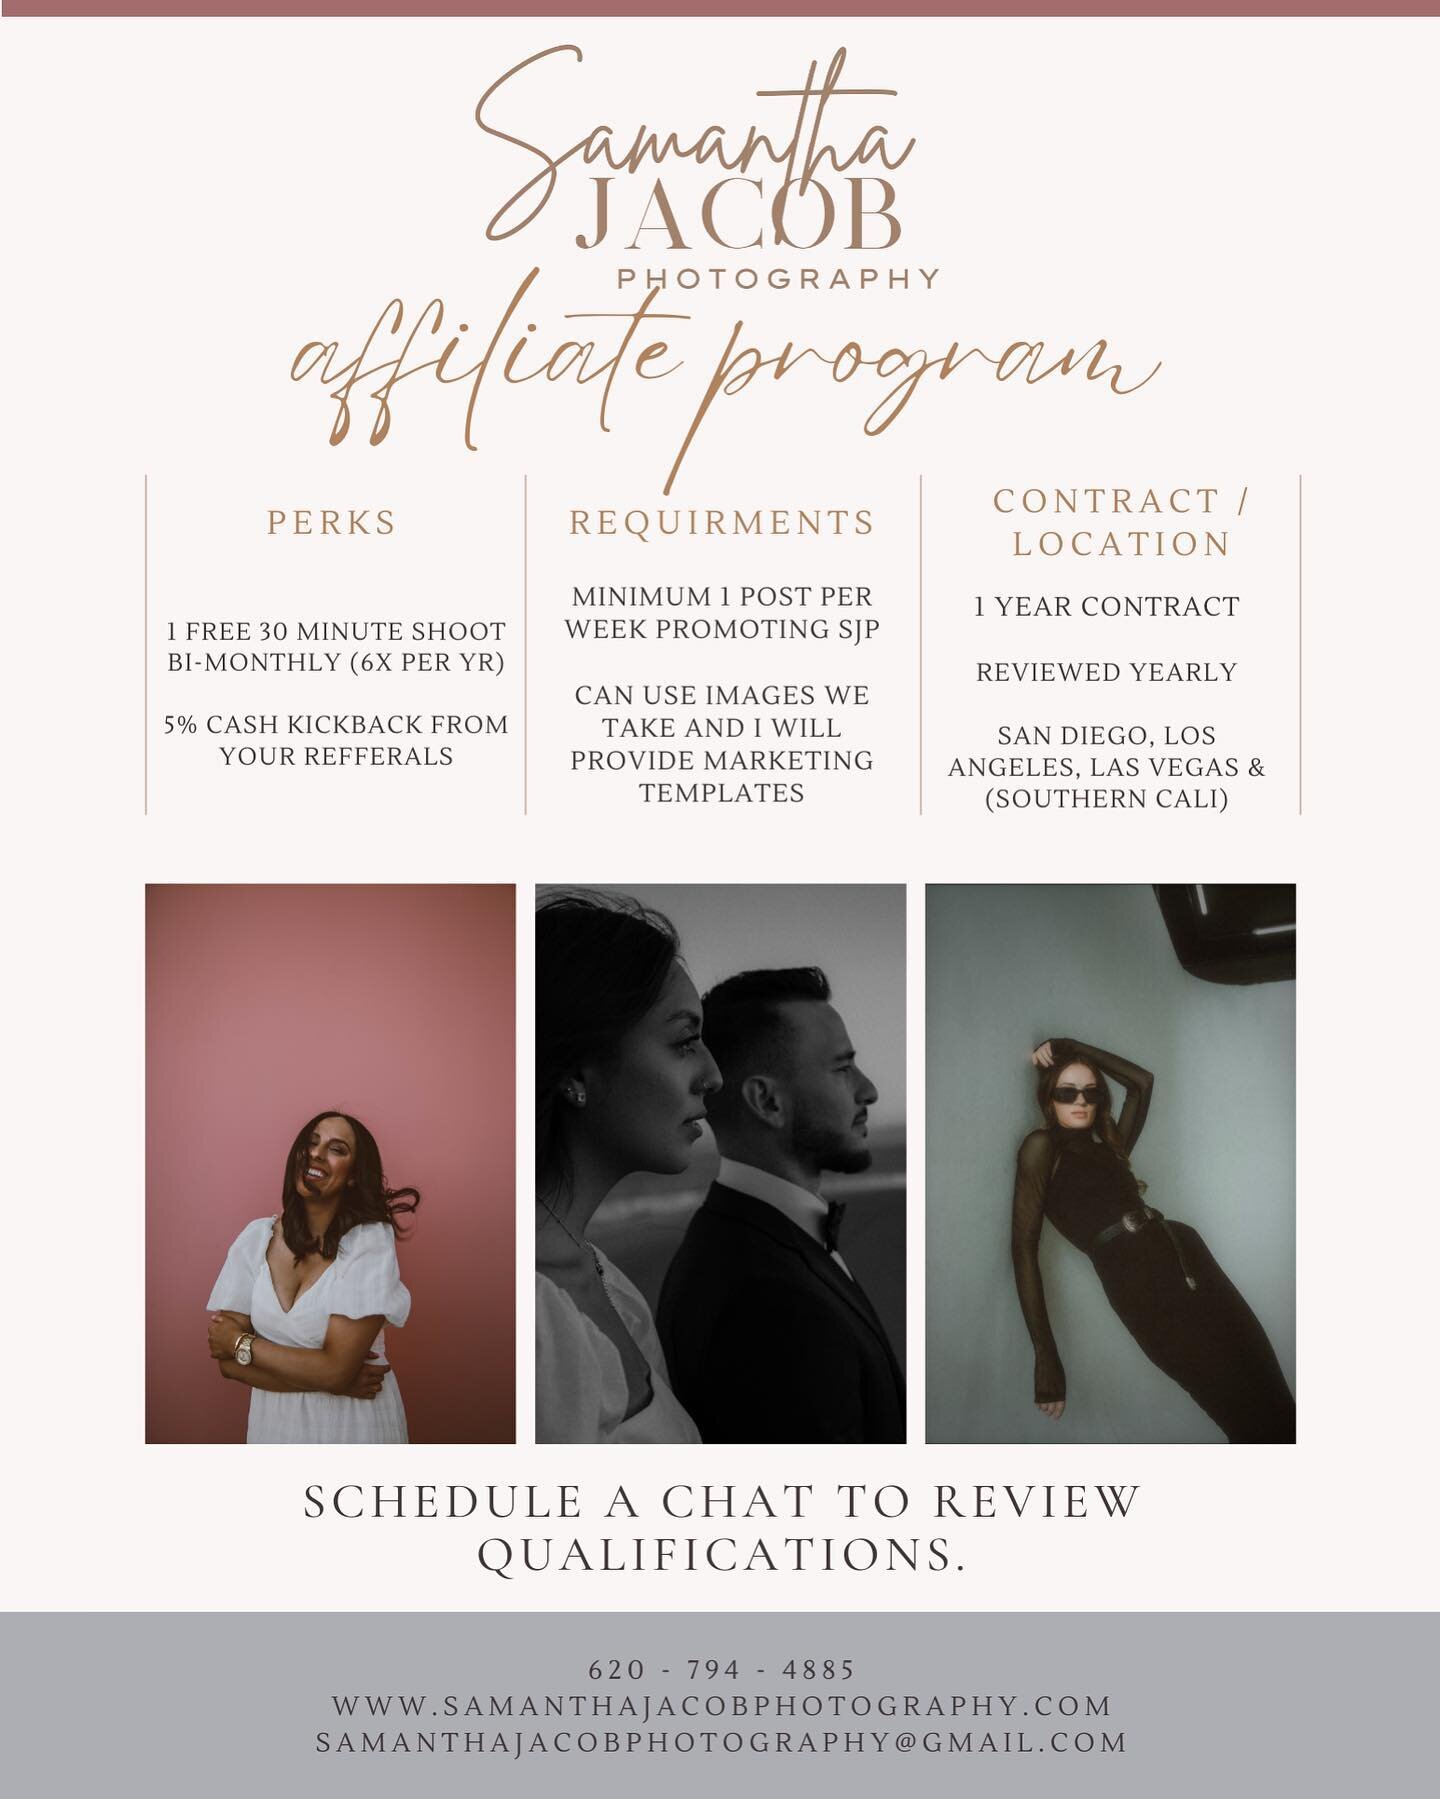 🚨 ATTENTION 🚨 
SAMANTHA JACOB PHOTOGRAPHY AFFILIATE PROGRAM IS NOW OPEN!

✨ What&rsquo;s the SJP affiliate program? Glad you asked. This program is a mutually beneficial program. 
An SJP affiliate will recieve:
- free 30 minute photoshoot bi-monthl